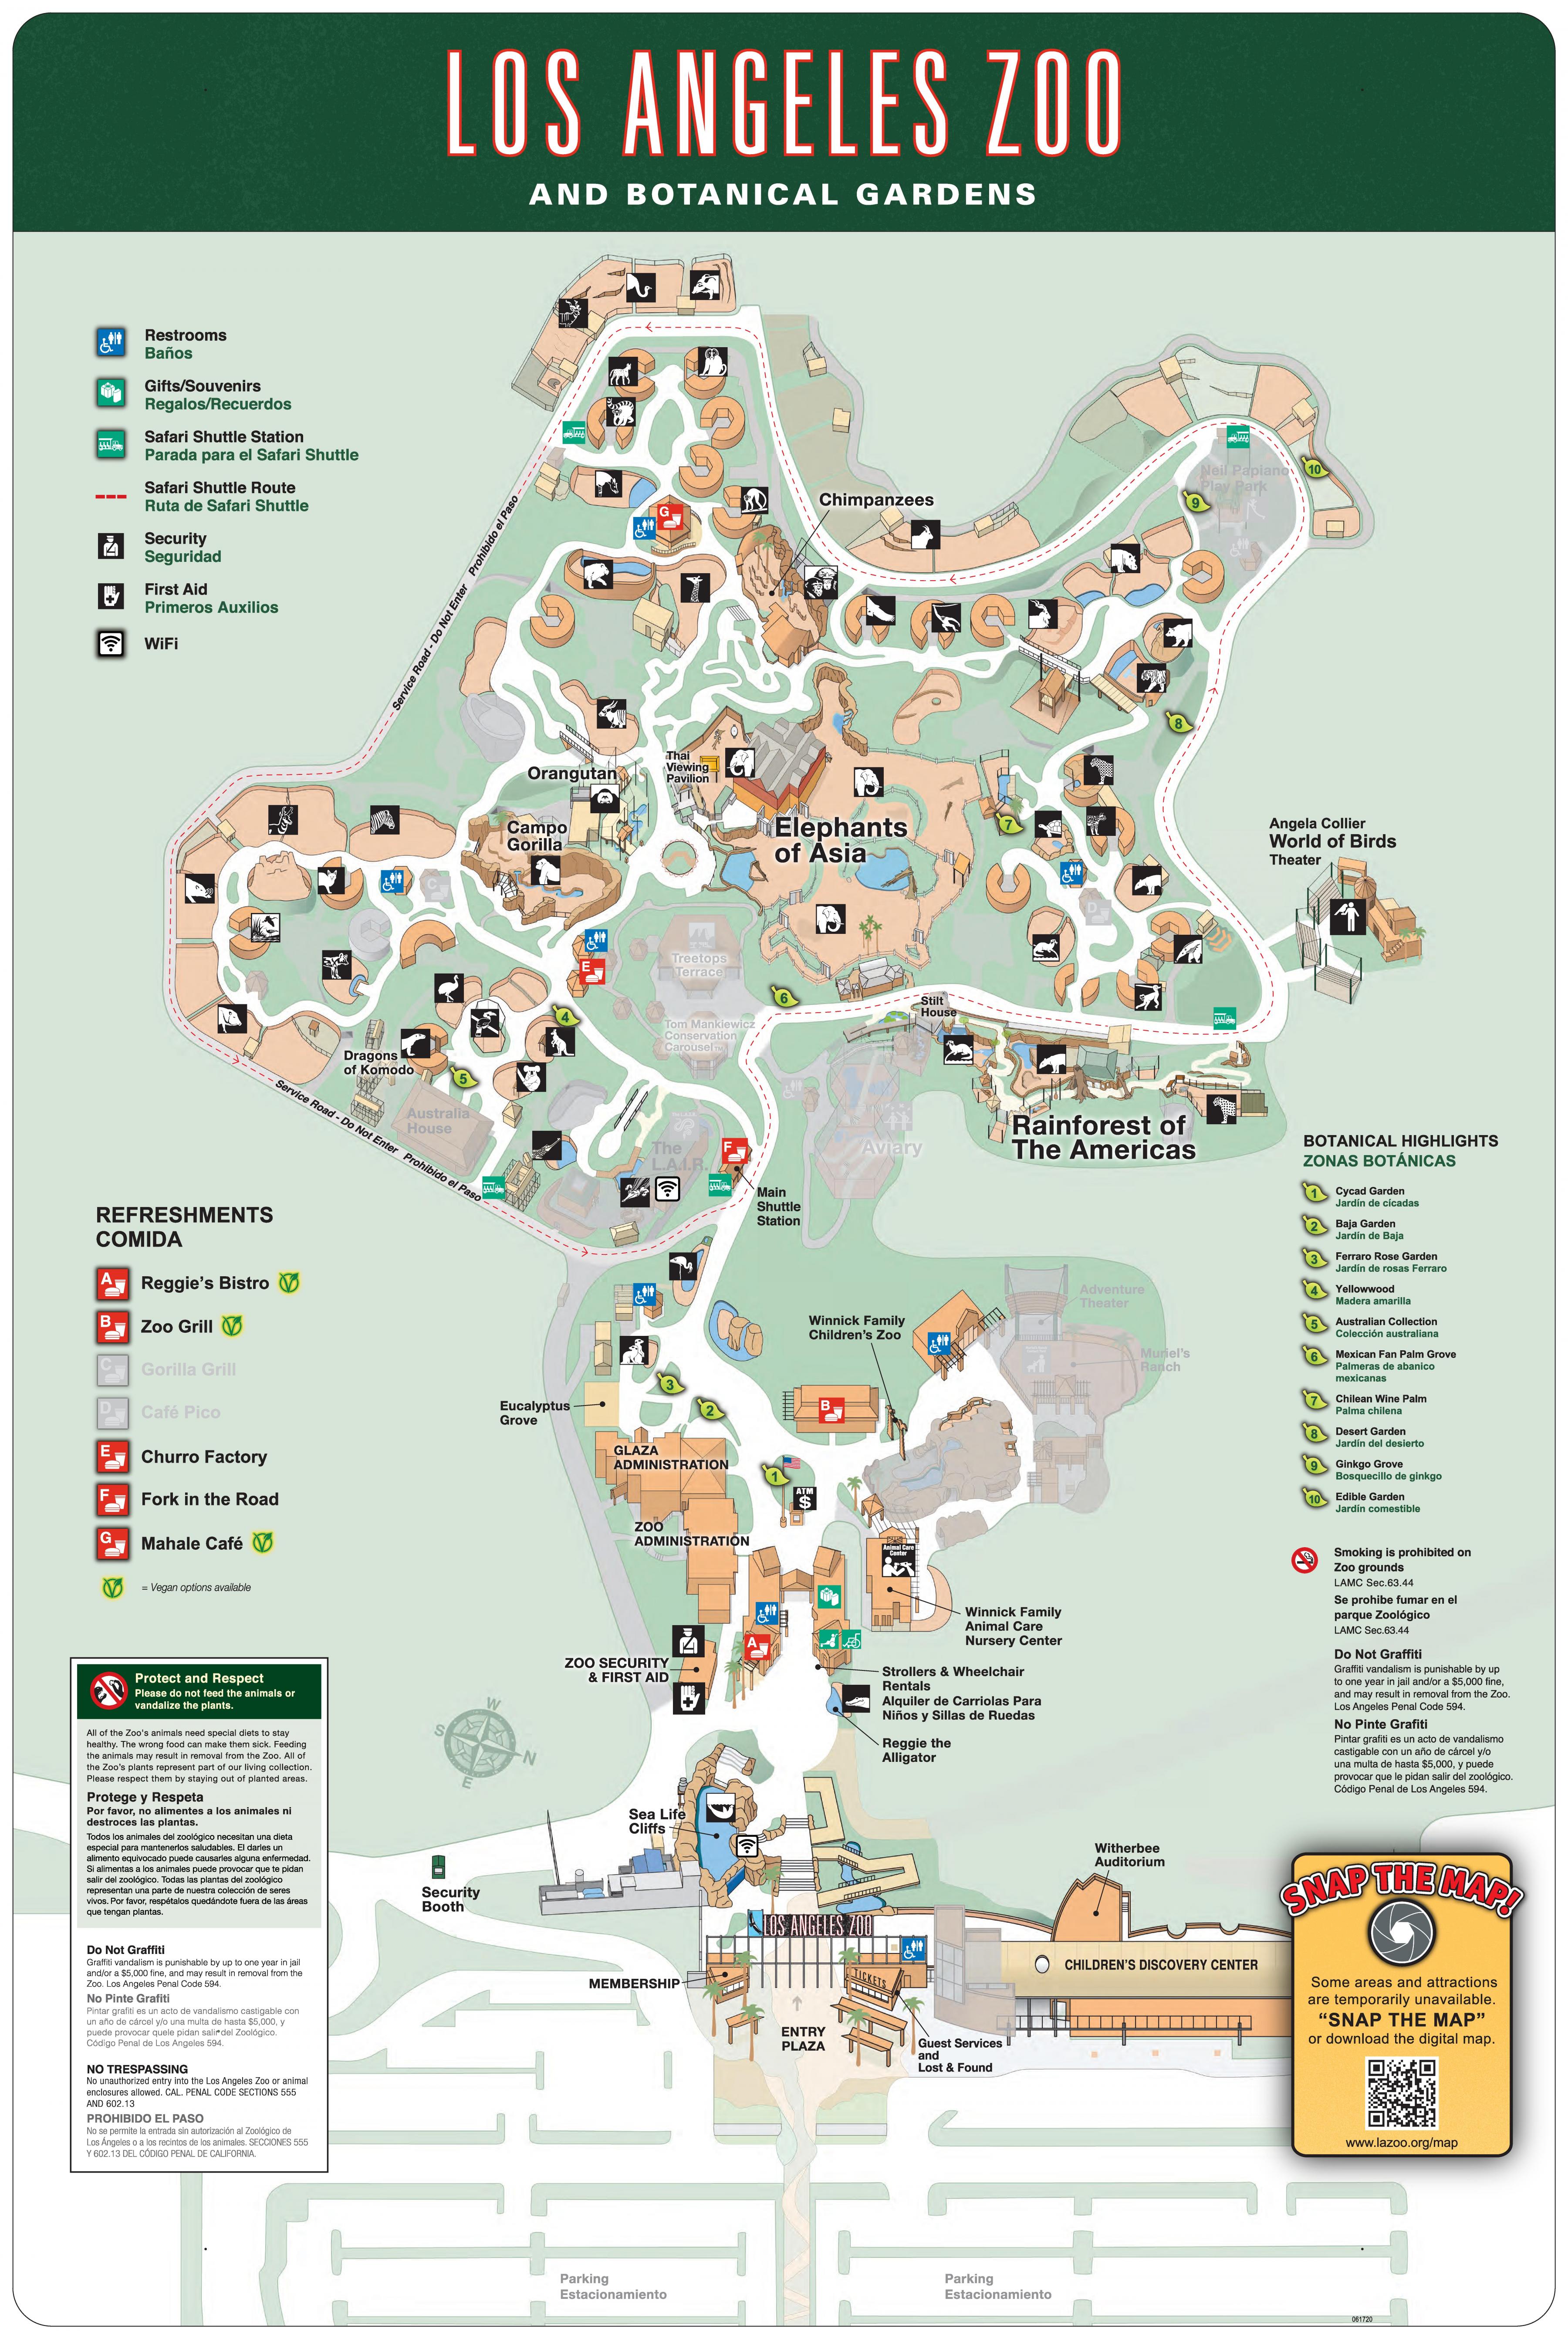 MAP of the NBA & MAP of the LA ZOO